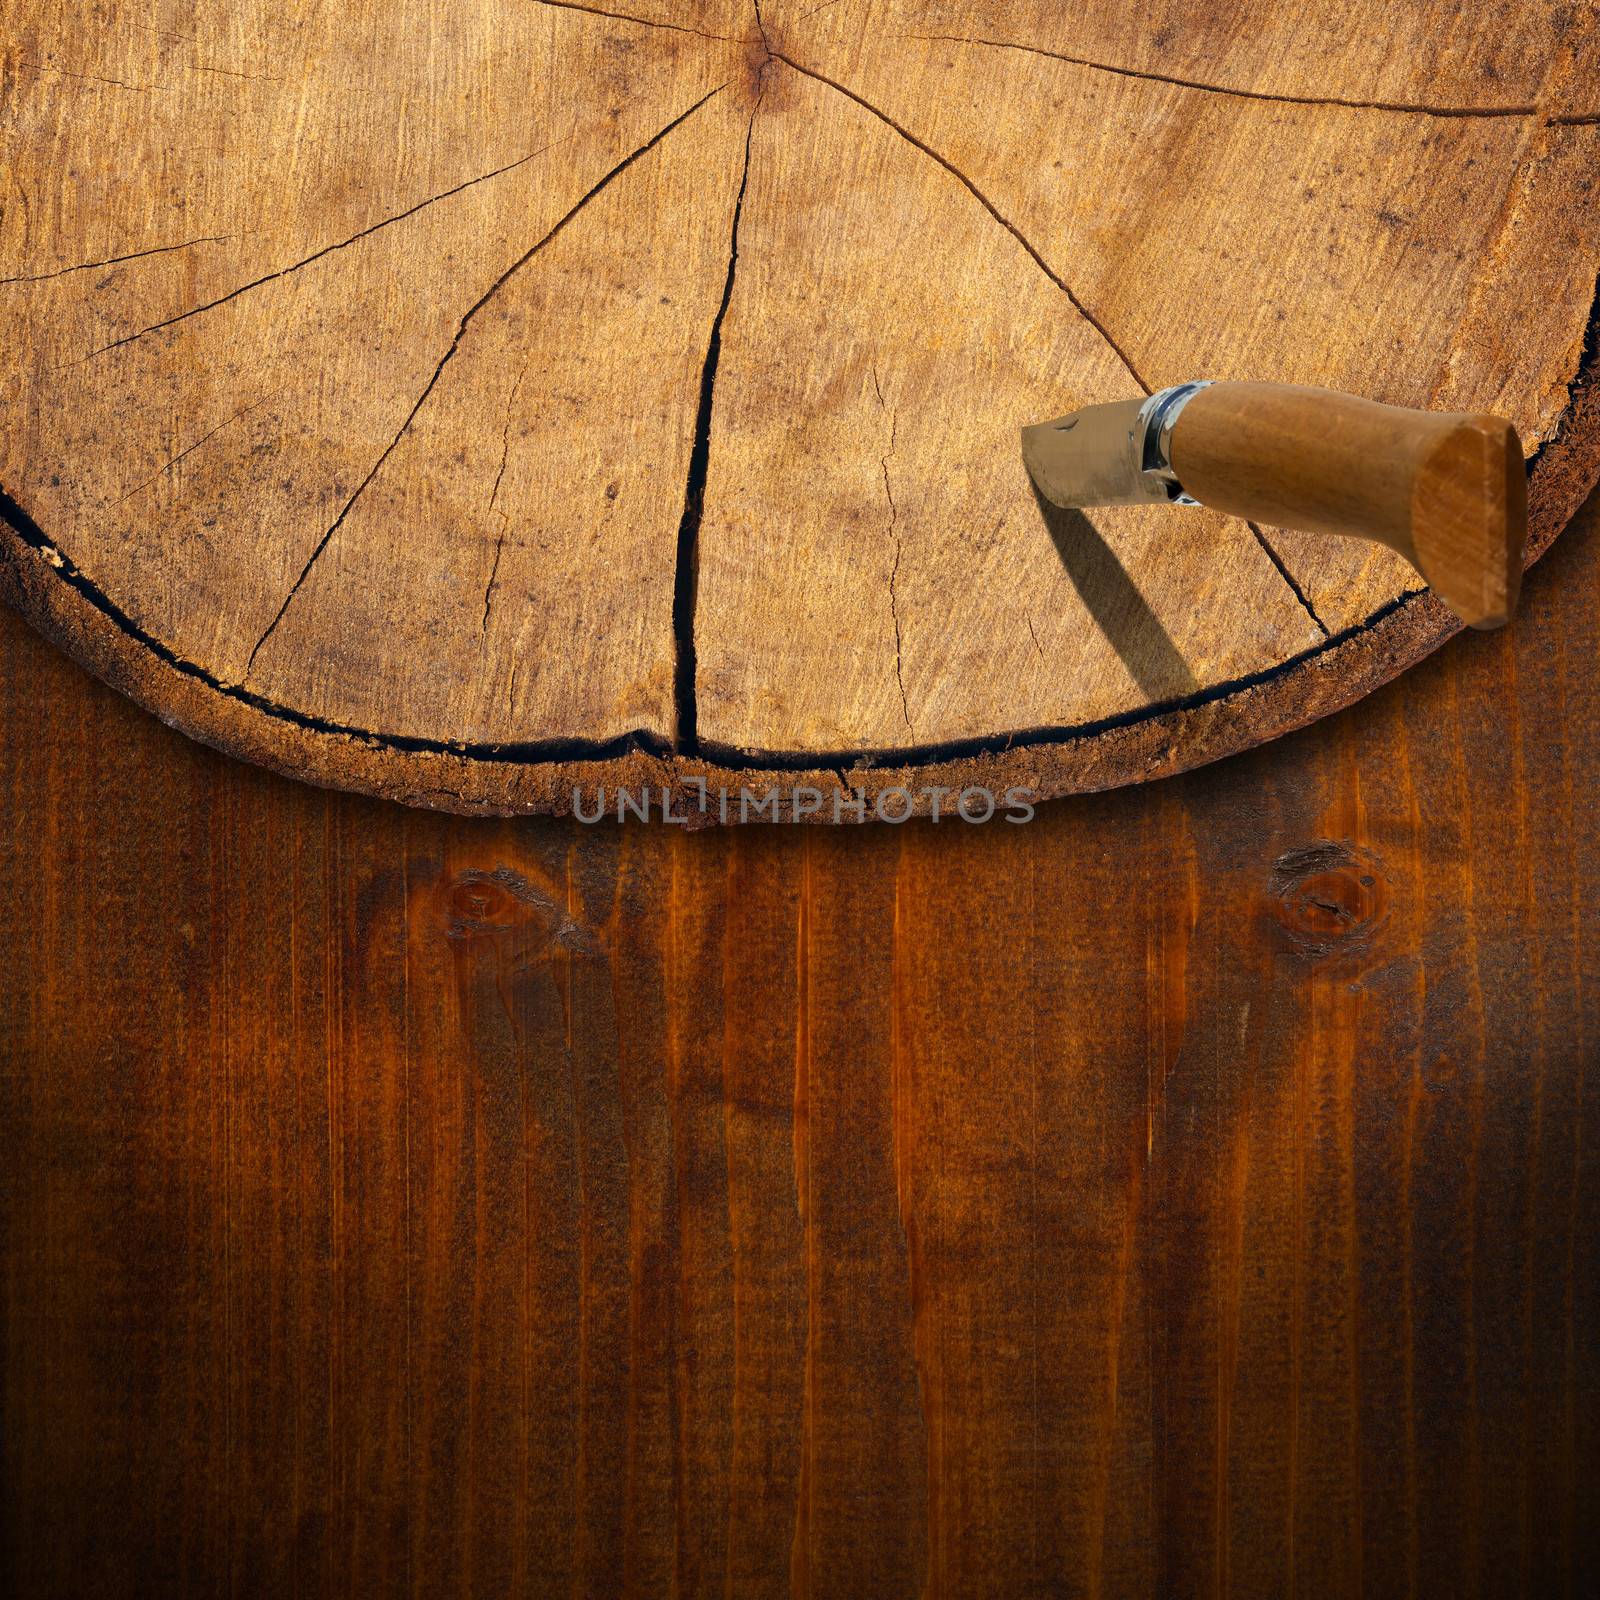 Wooden background with trunk section, folding knife and shadows